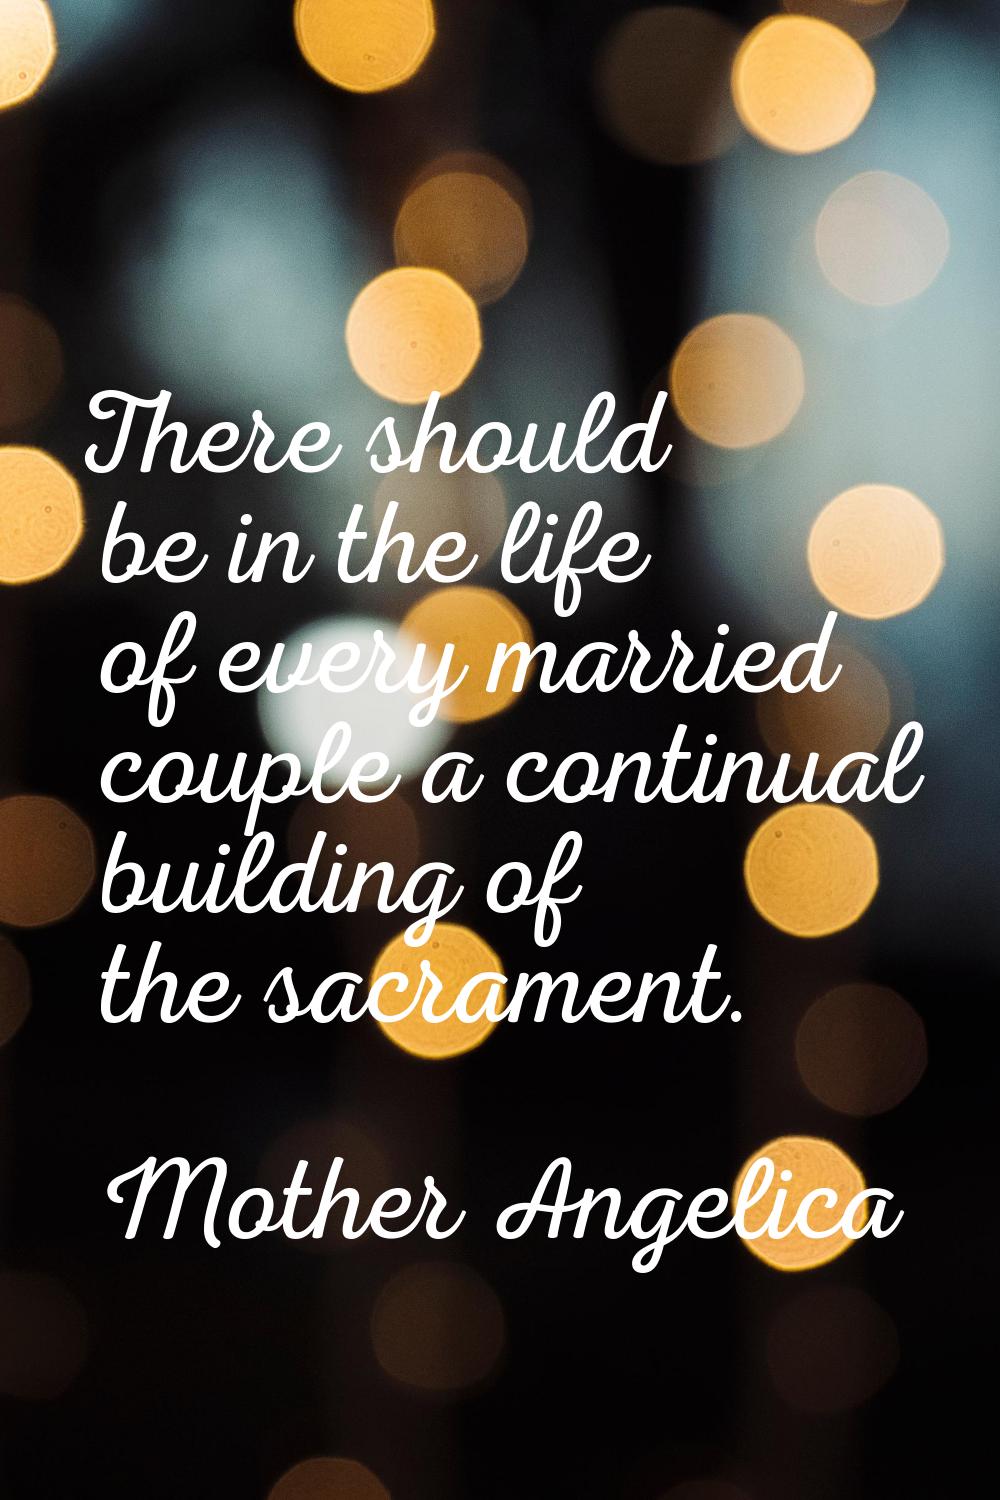 There should be in the life of every married couple a continual building of the sacrament.